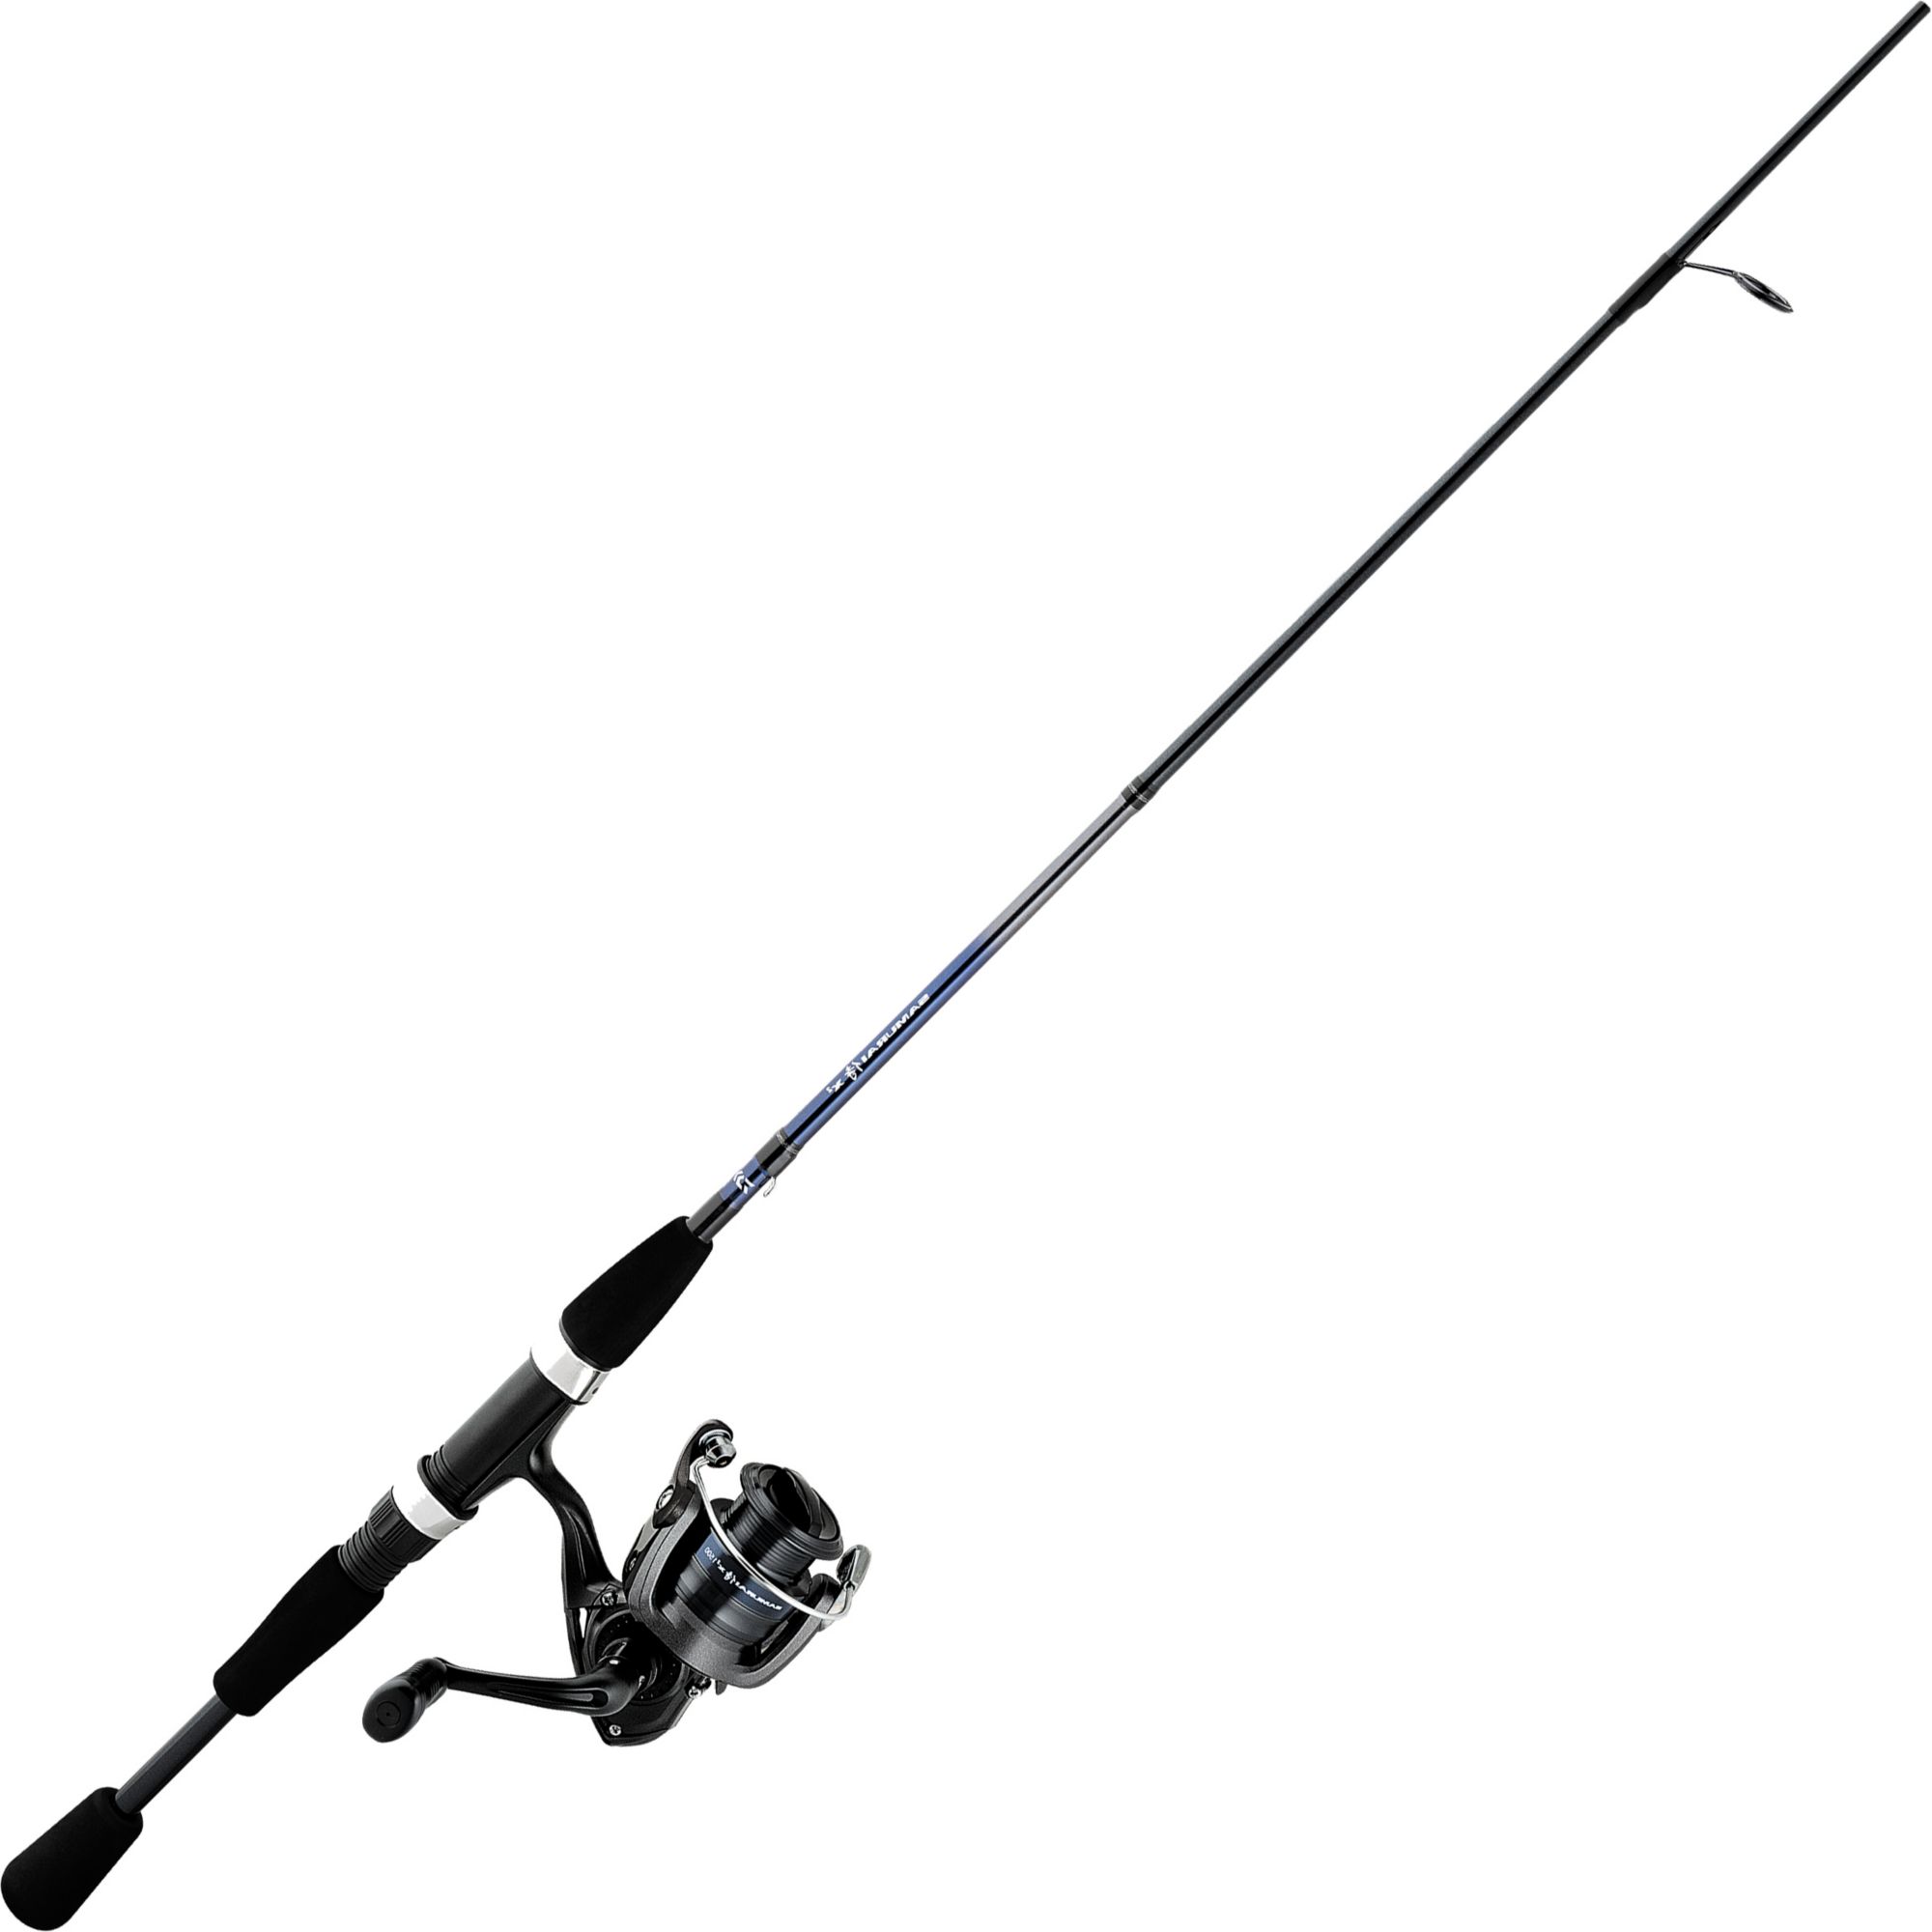 Discount & Clearance Fishing Gear  Curbside Pickup Available at DICK'S